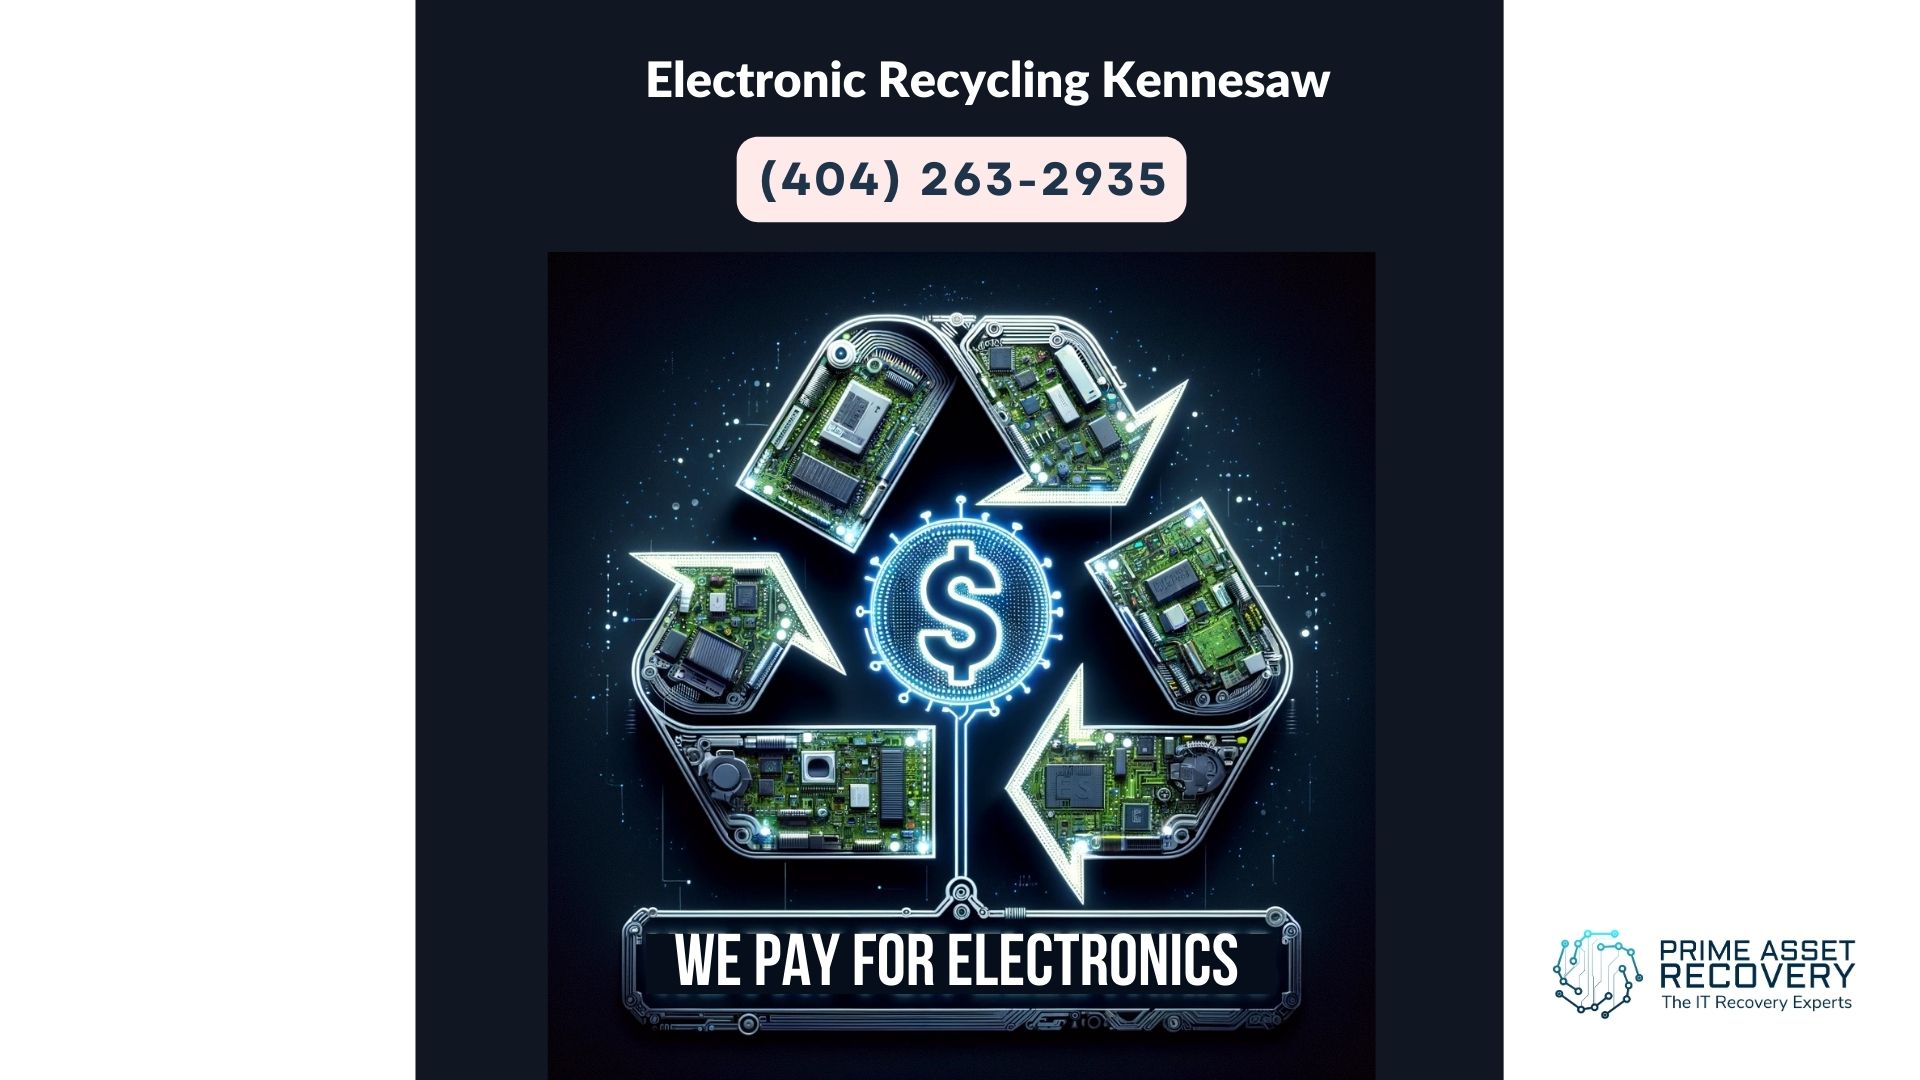 Electronic Recycling Kennesaw- Prime Asset Recovery Your Partner in Responsible Electronics Recycling